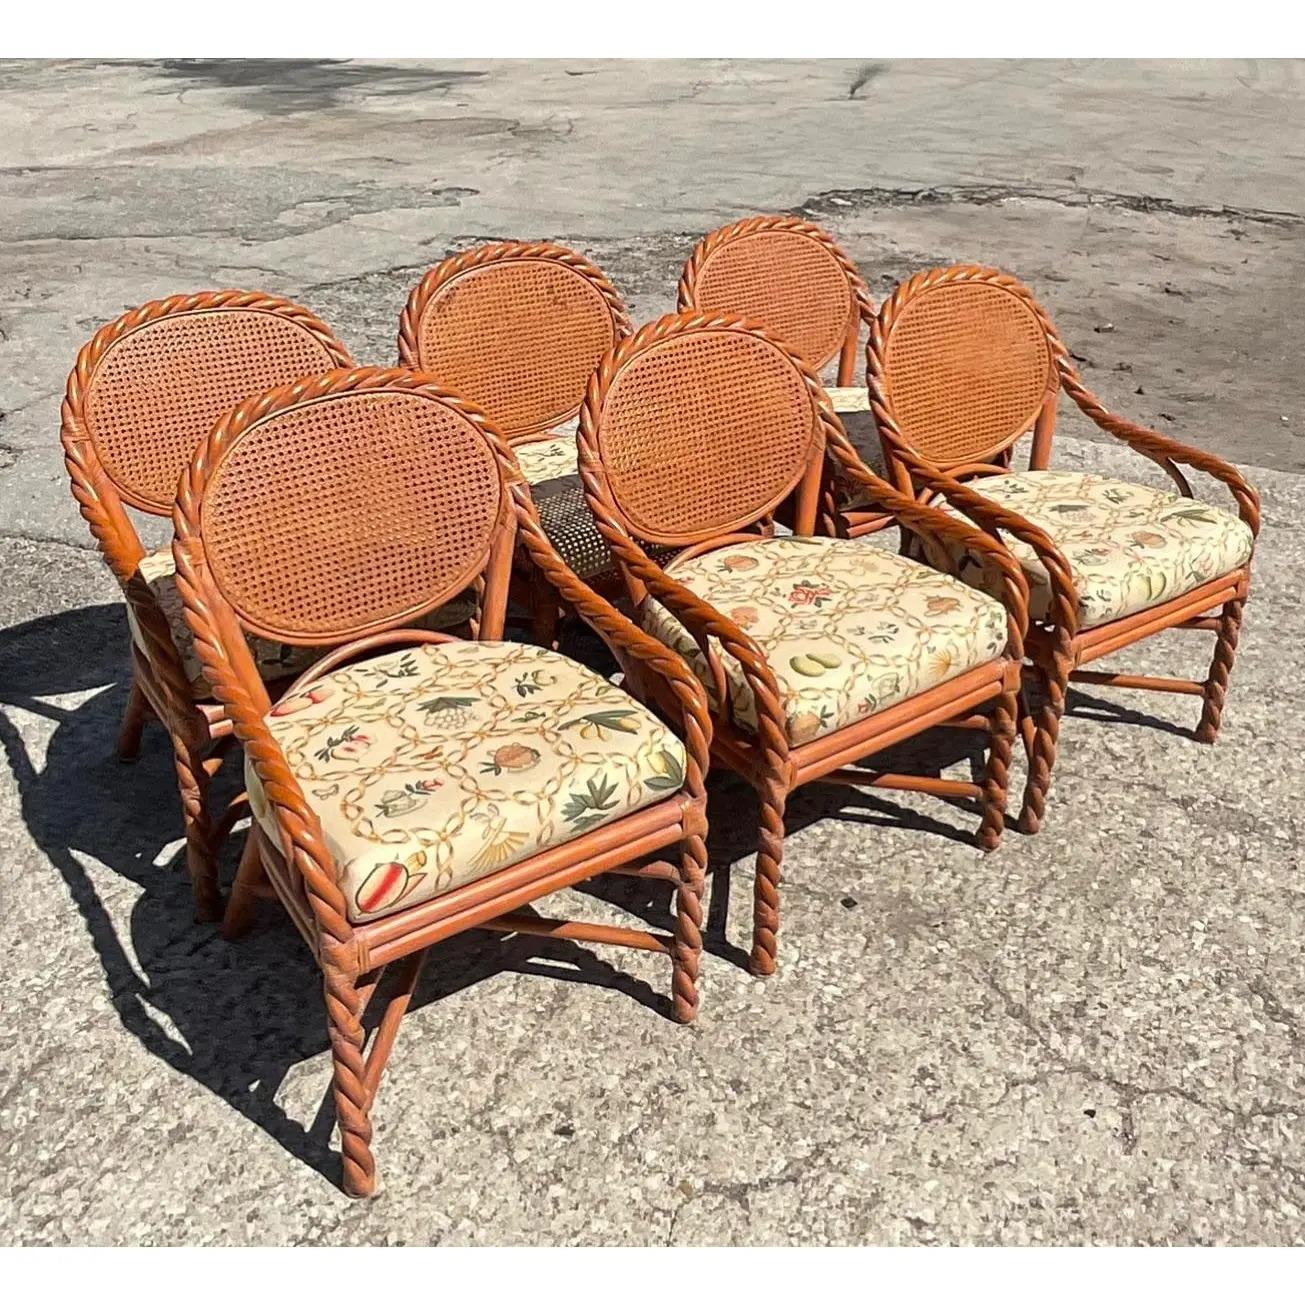 A fabulous set of 6 Coastal dining chairs. A fabulous twisted design with a cane back and a chic painted percale cushion. Made by the iconic McGuire groups. Tagged on the bottom. Acquired from a Palm Beach estate.